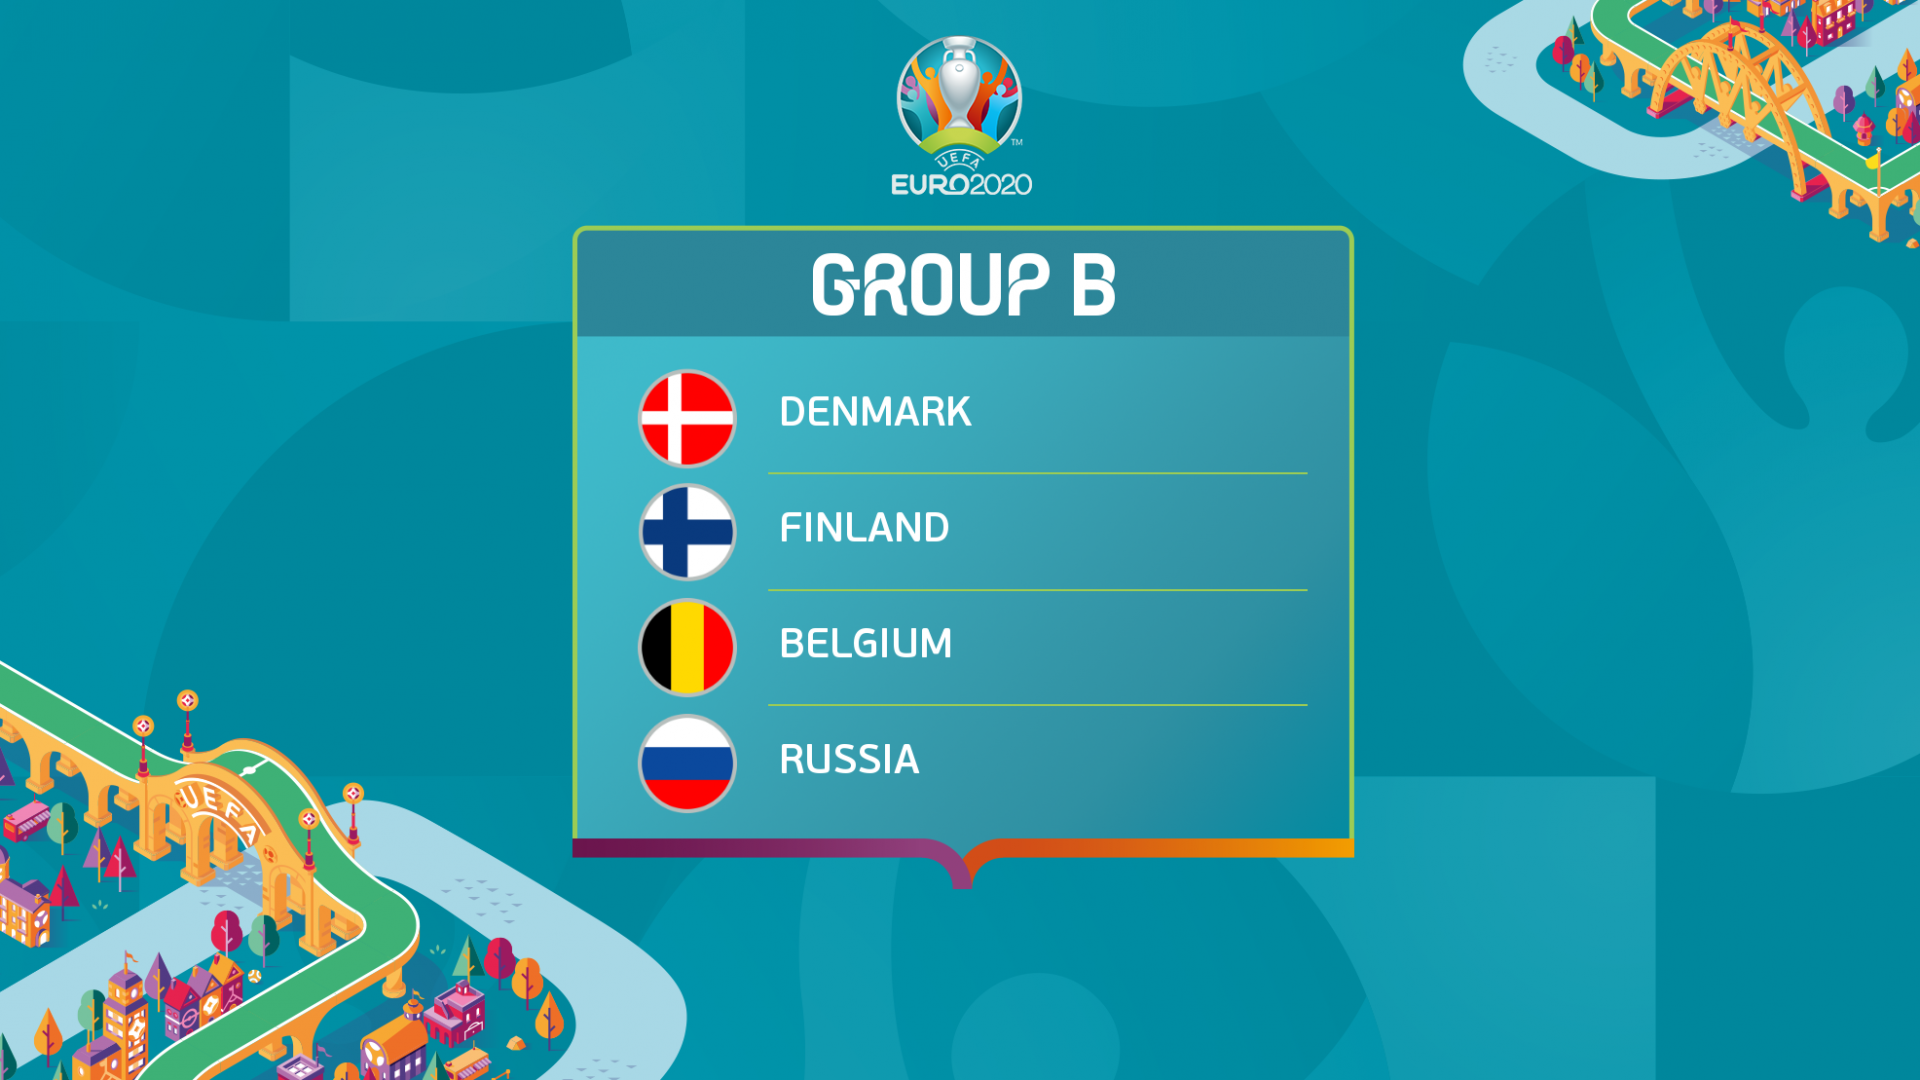 EURO 2020: Group Guide, Match Schedule and How to Watch